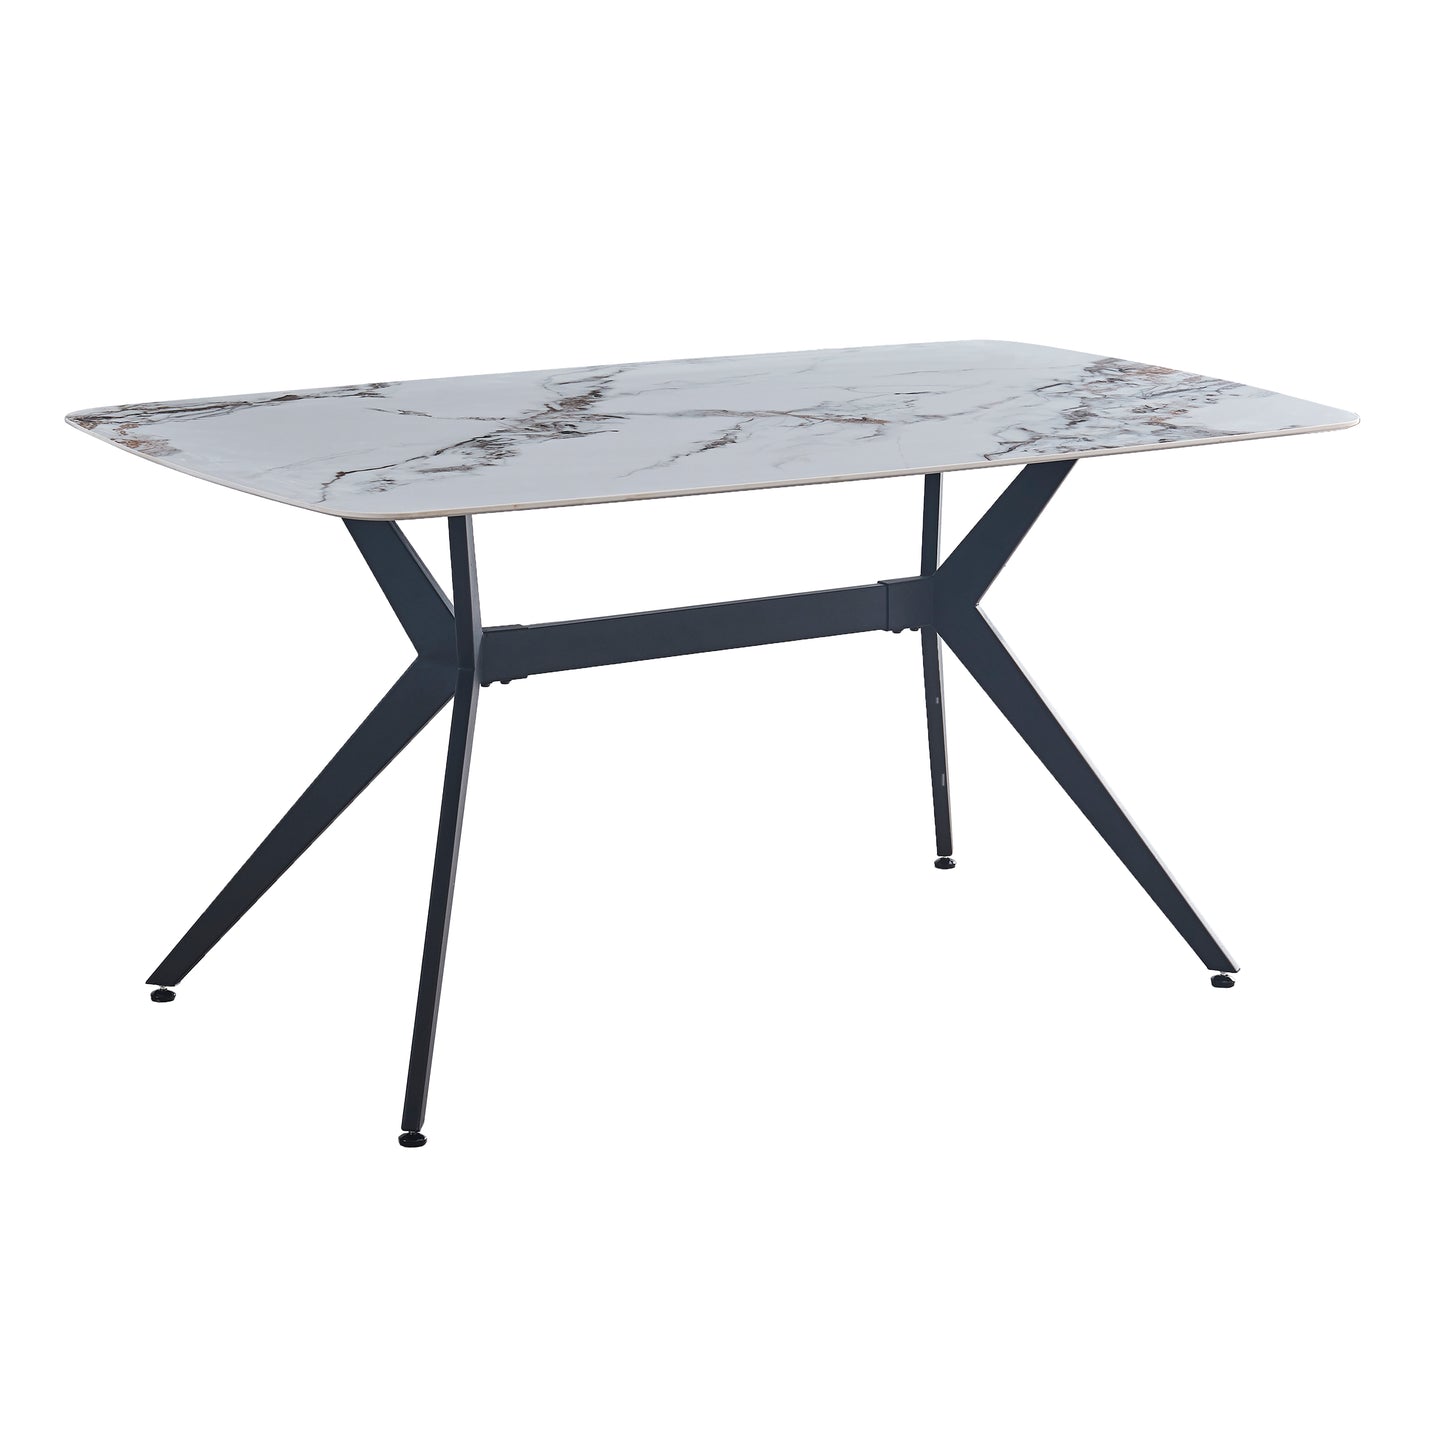 Criterion Phoenix Dining Table 1600mm Brown Grey Sintered Stone